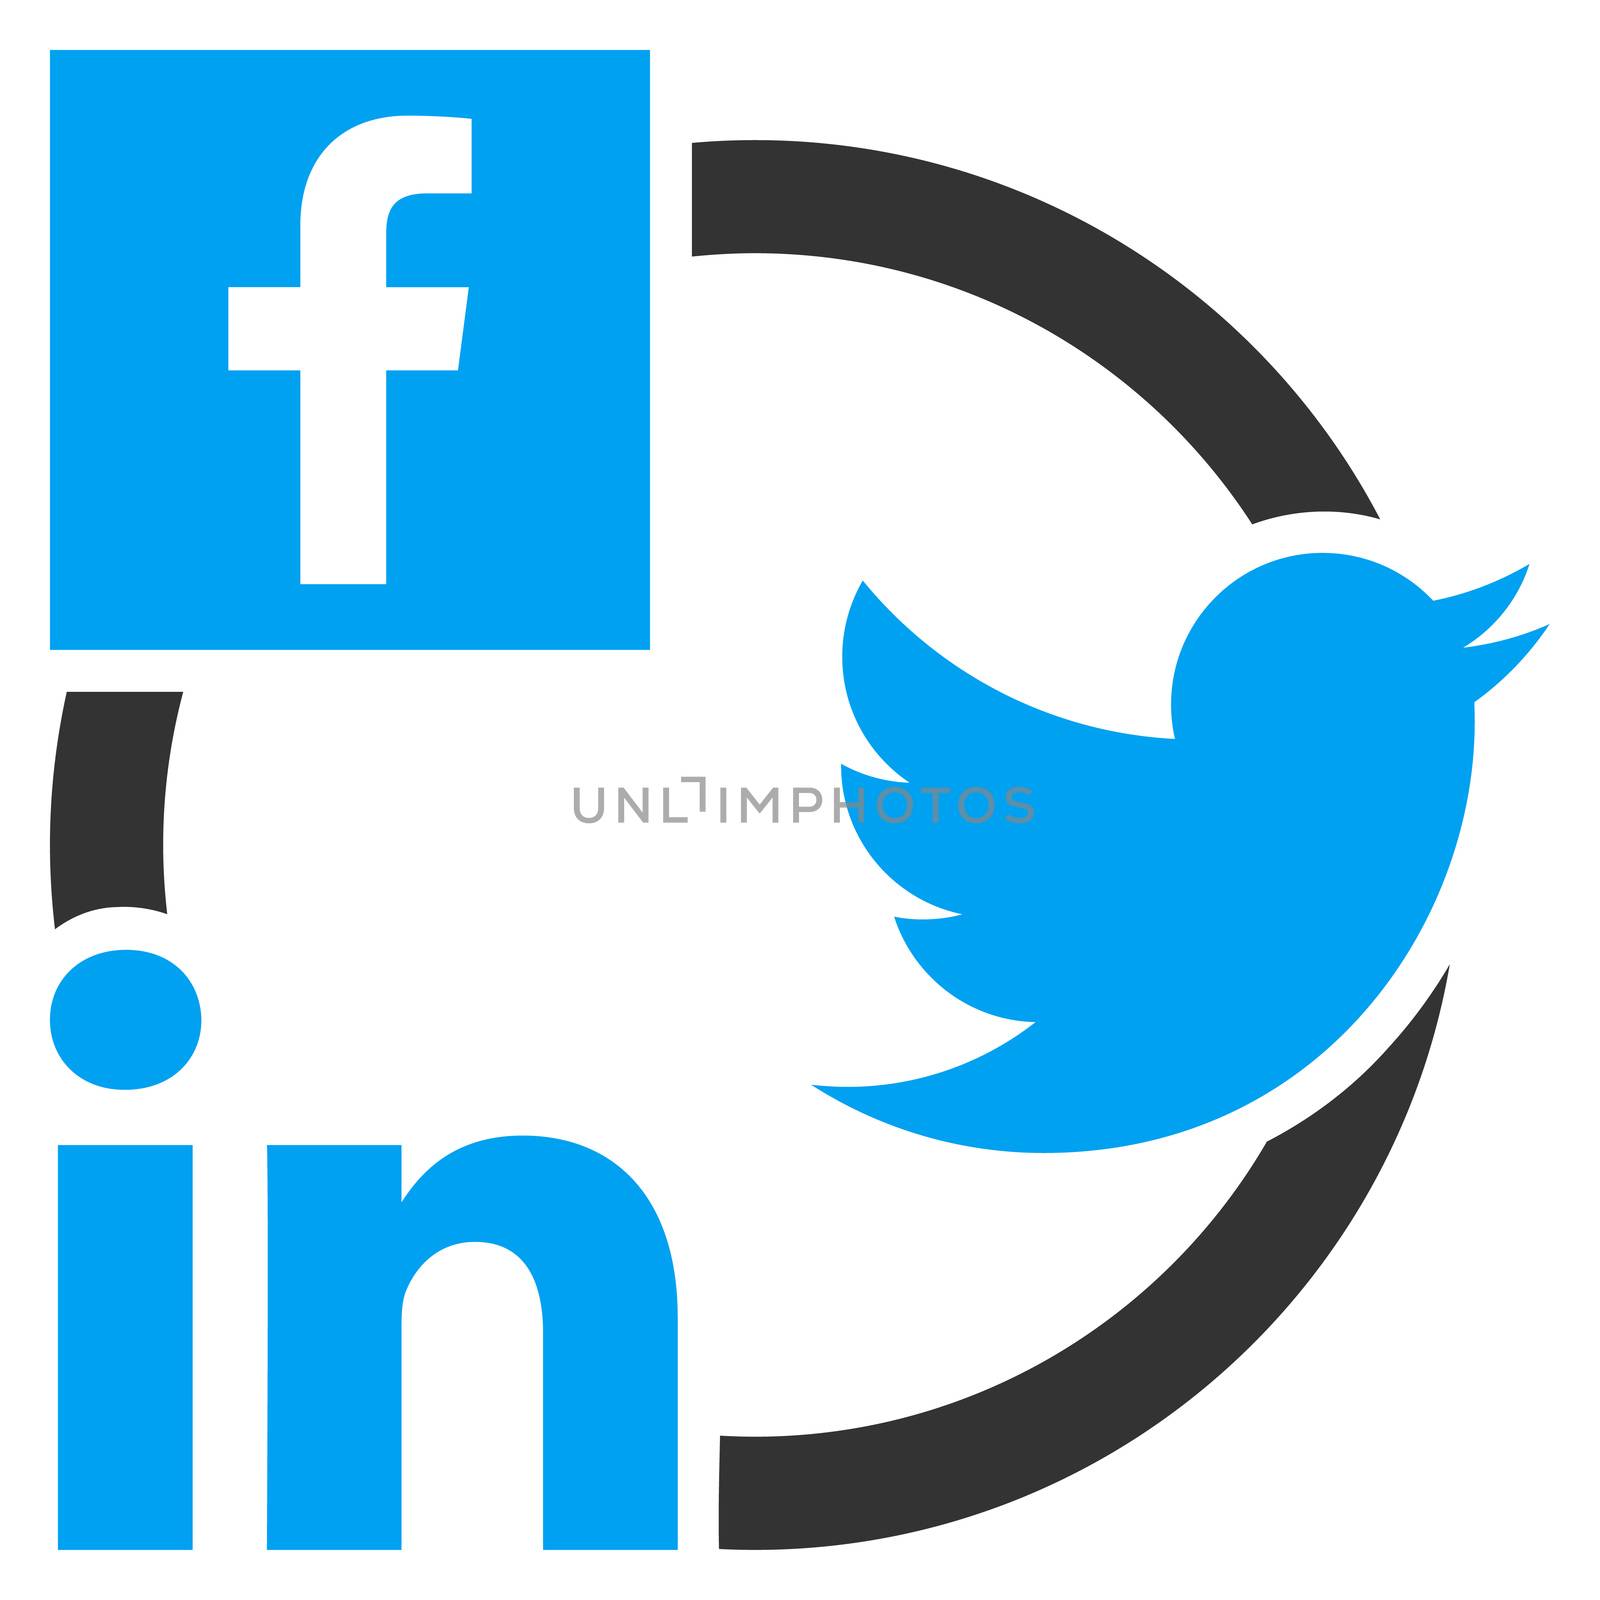 Social Networks Icon. This flat glyph symbol uses blue and gray colors, and isolated on a white background.